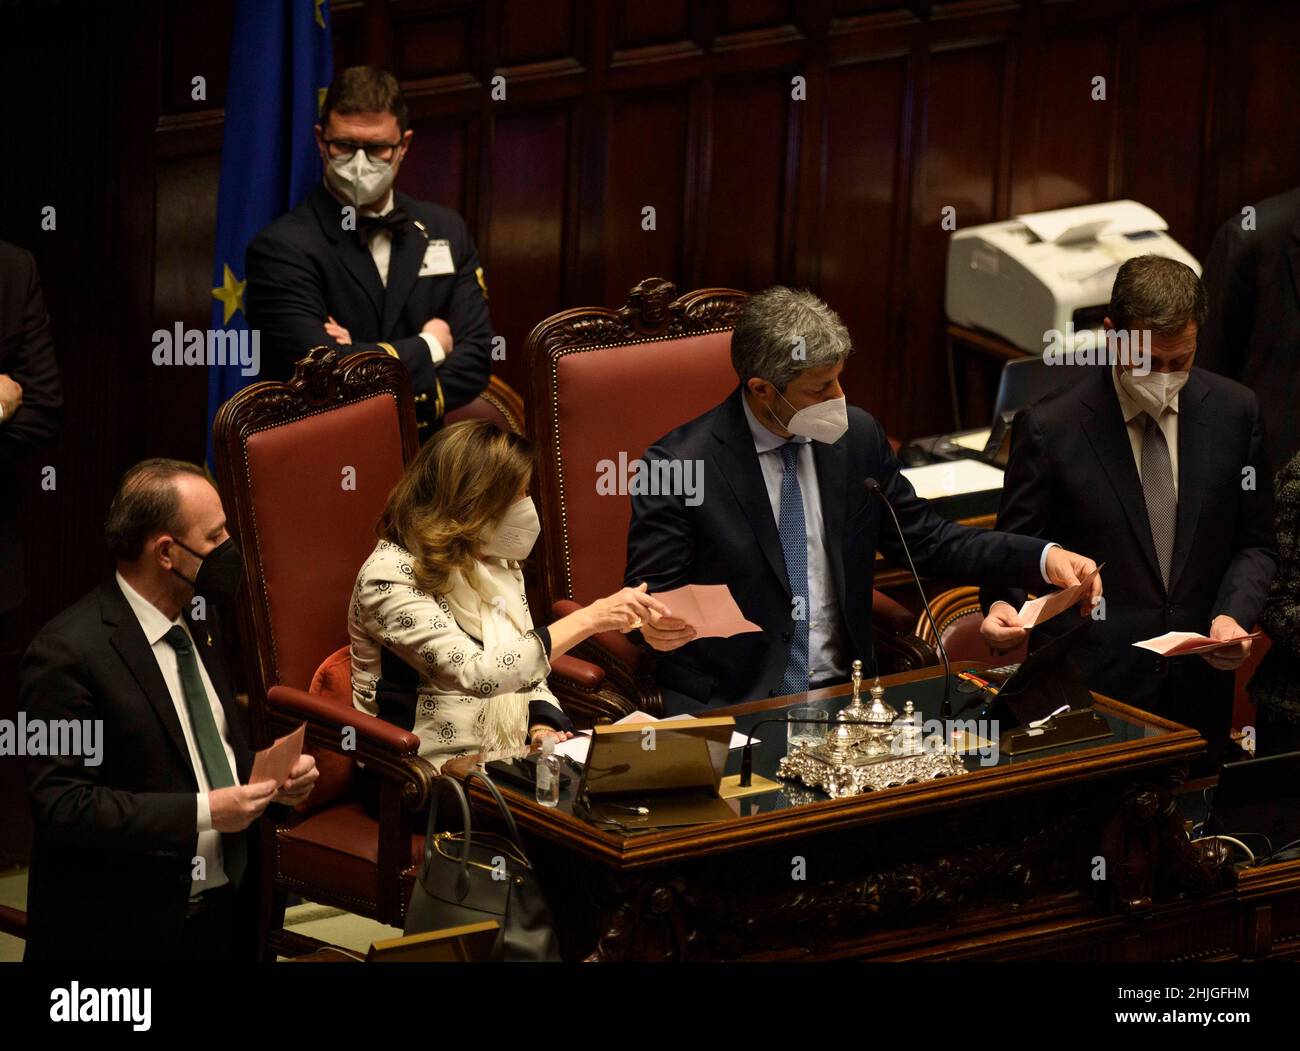 Rome, Italy. 29th Jan, 2022. Maria Elisabetta Alberti Casellati (2nd L, Front), president of the Italian Senate, and Roberto Fico (2nd R, Front), president of the Italian Chamber of Deputies, count ballots during the eighth round of voting to elect Italy's new president in Rome, Italy, on Jan. 29, 2022. Italian President Sergio Mattarella was elected to a second term by the parliament gathered in a joint session in the eighth round of voting on Saturday. Credit: Str/Xinhua/Alamy Live News Stock Photo